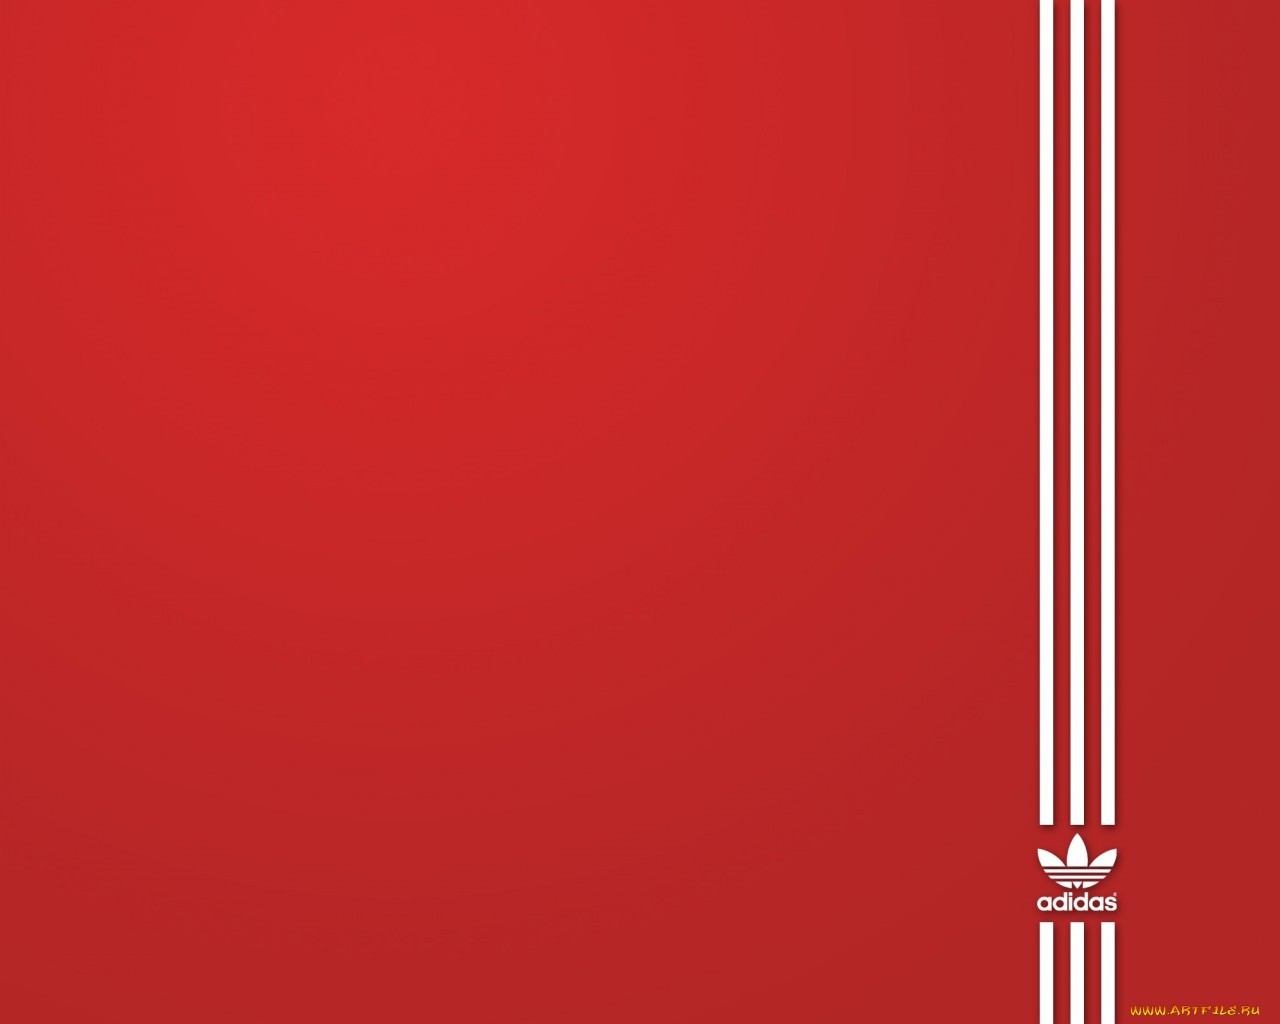 adidas, brands, logos, background, red Full HD